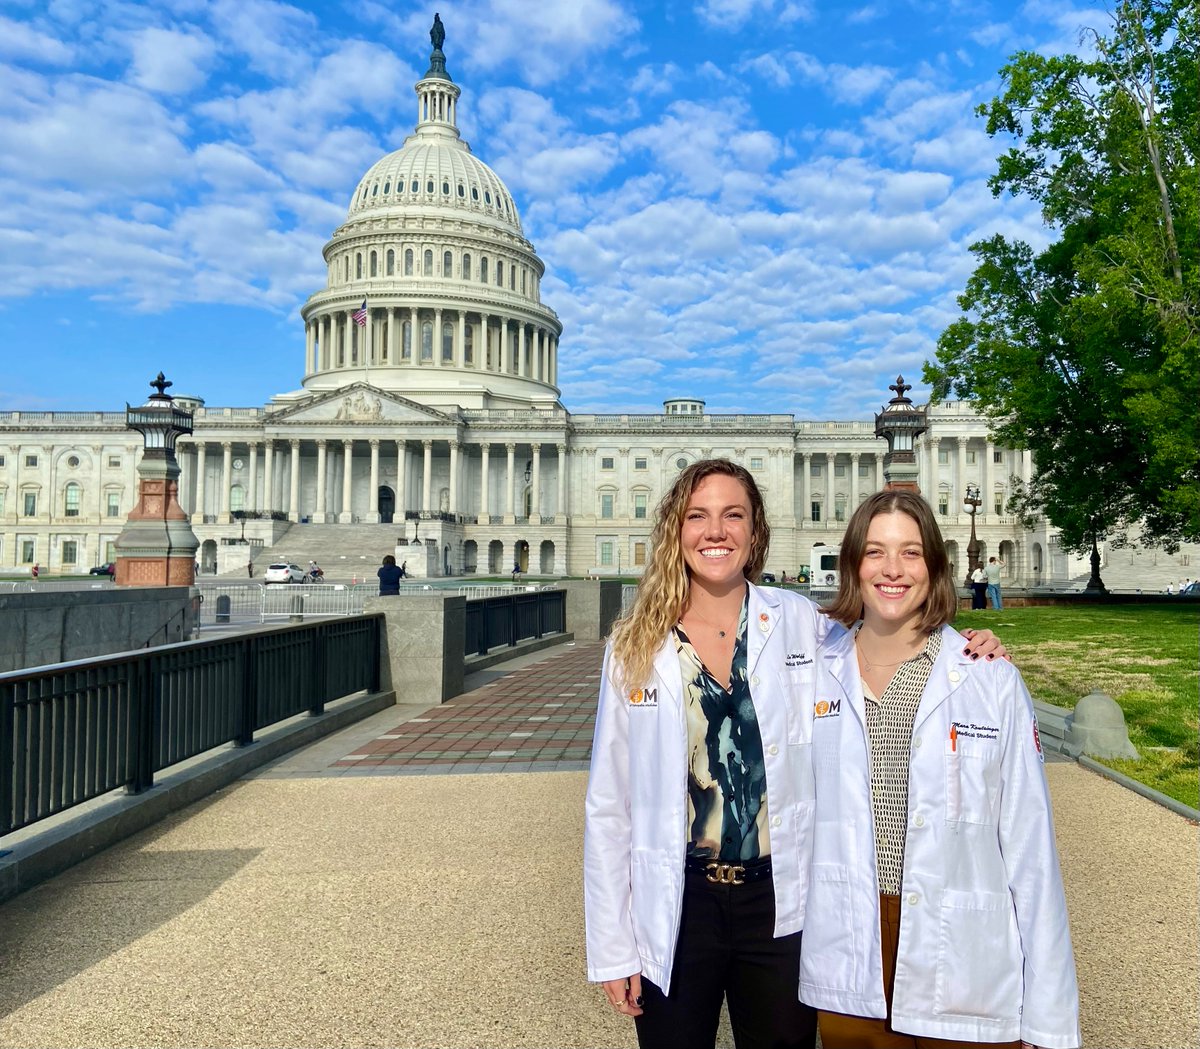 Student Doctors Lu Wolff, ICOM-SOMA President, and Mara Krutsinger, ICOM-SOMA National Liaison Officer, joined more than 1,000 of their peers from osteopathic medical schools across the nation for @AOAforDOs  DO Day on Capitol Hill.

#IdahoCOM #ICOM #ChooseDO #DODay24